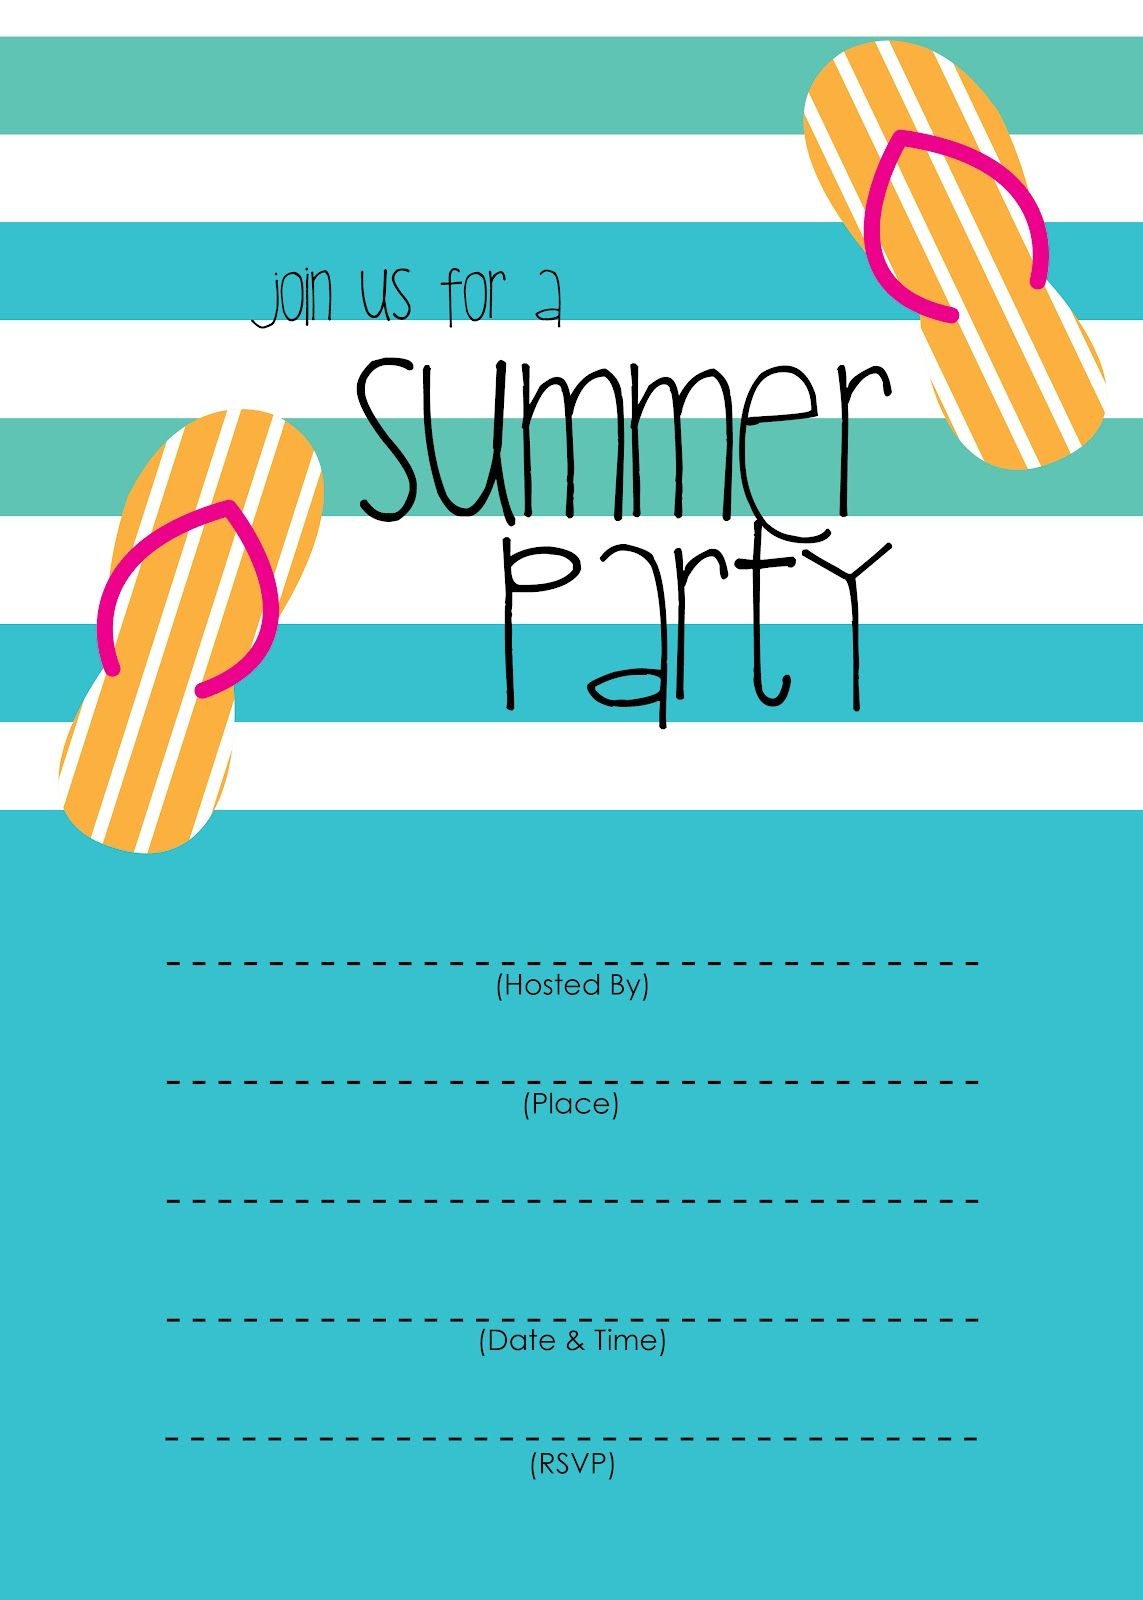 Summer Party Invitation – Free Printable | End Of Year Party Ideas - Free Printable Pool Party Invitation Cards